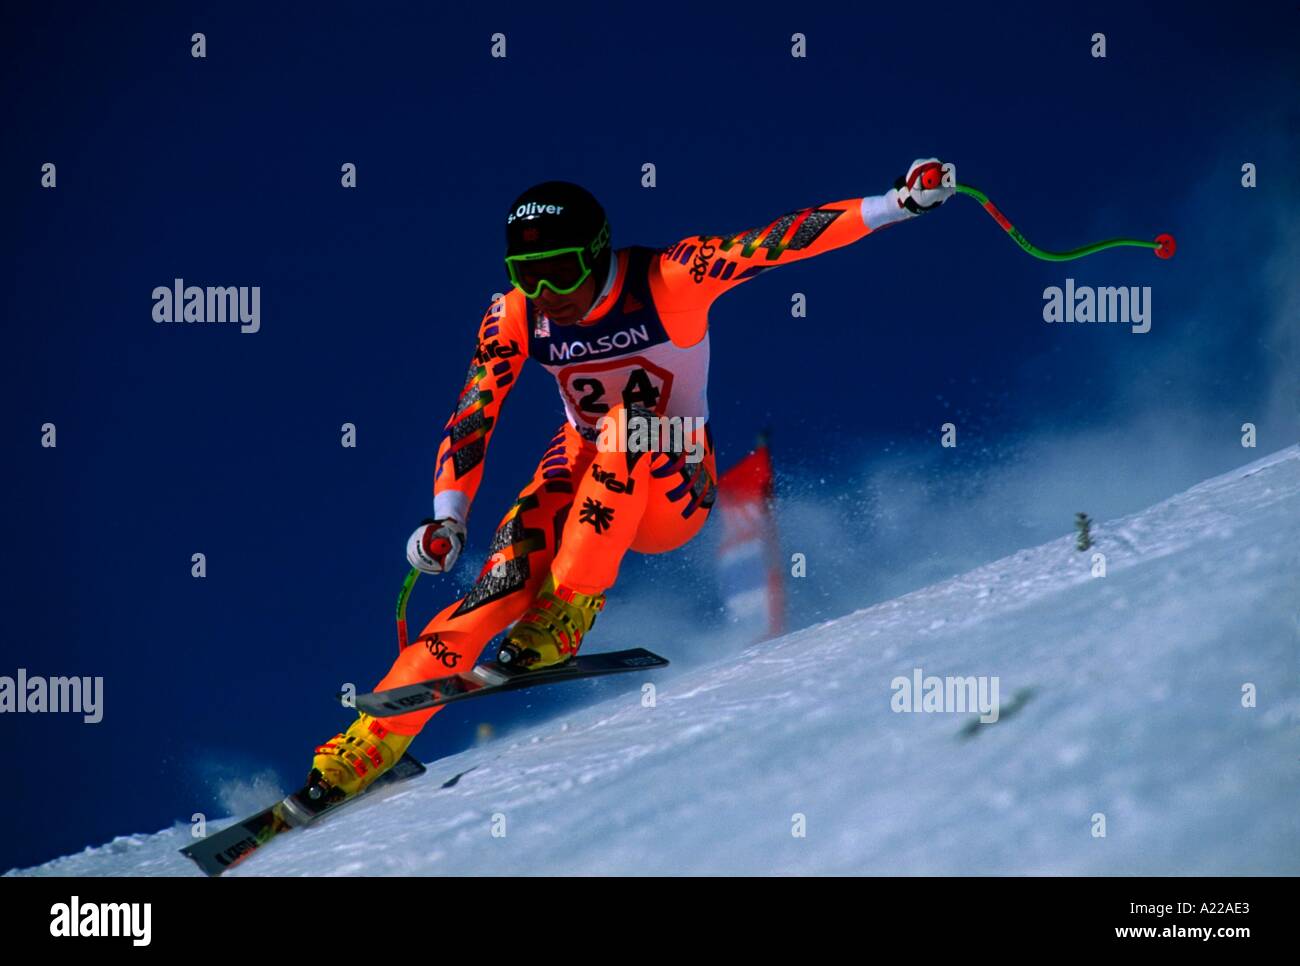 Ski racer Peter Rzehak carving at speed during race in the 1991 World Cup at Lake Louise USA I Tomlinson Stock Photo